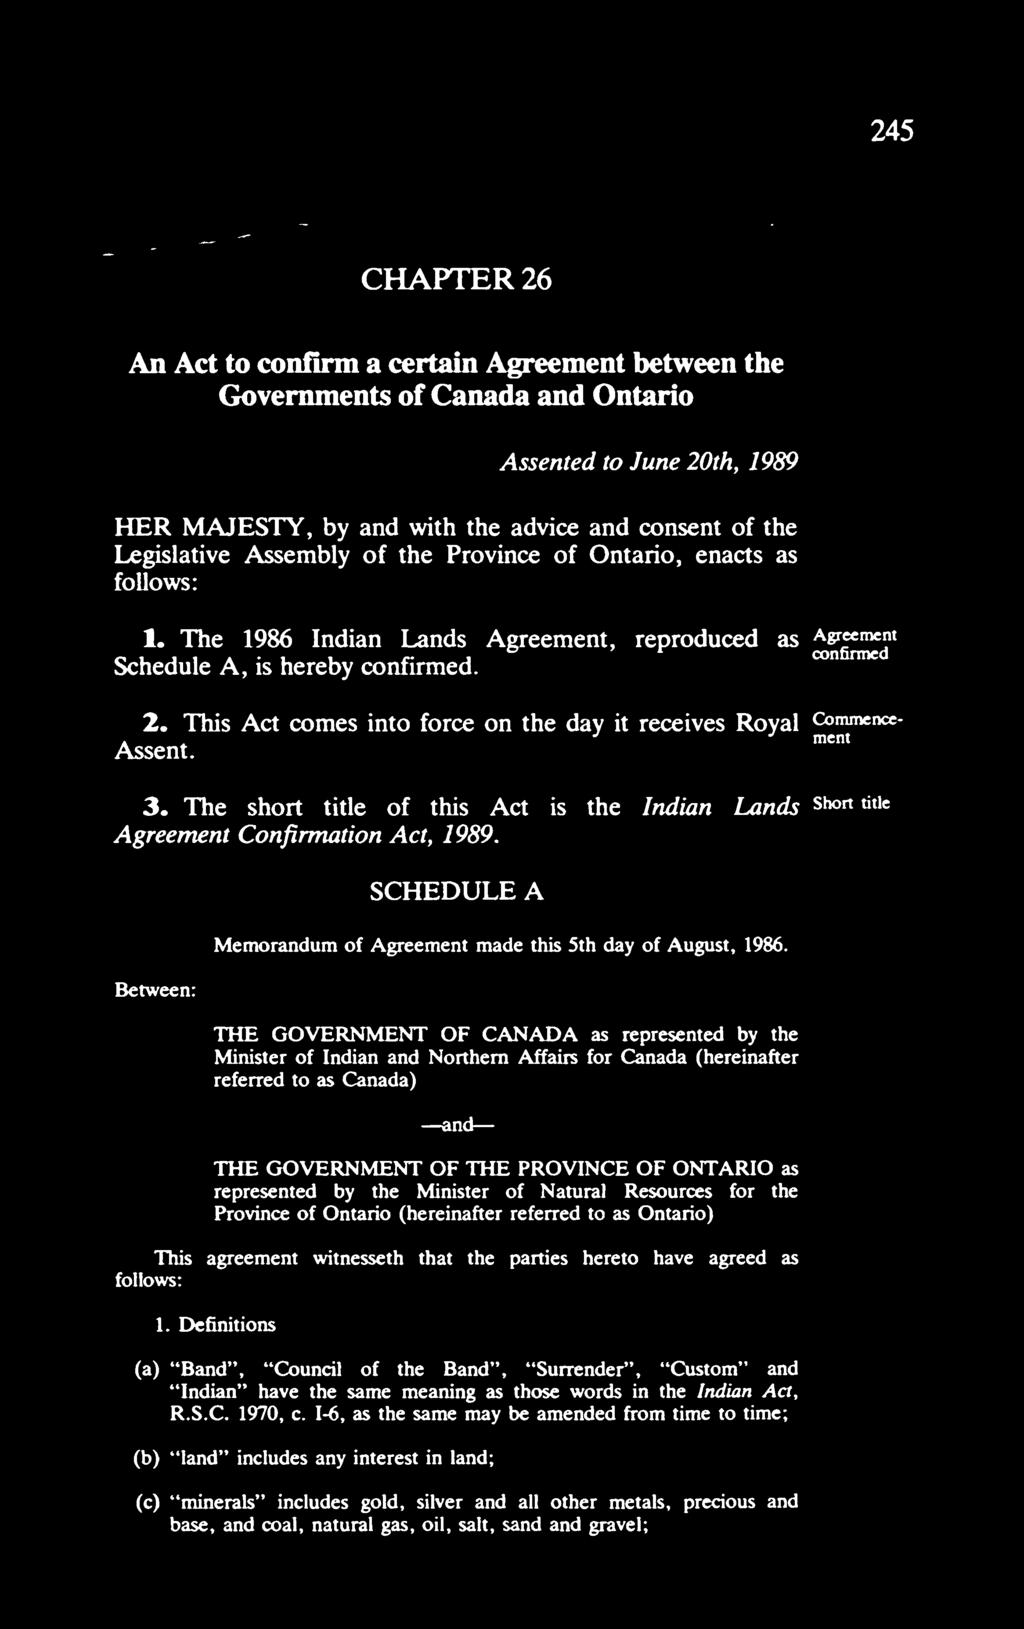 2* This Act comes into force on the day it receives Royal Commencc- ' -^. ^ mcnt Assent. 3. The short title of this Act is the Indian Lands Agreement Confirmation Act, 1989.